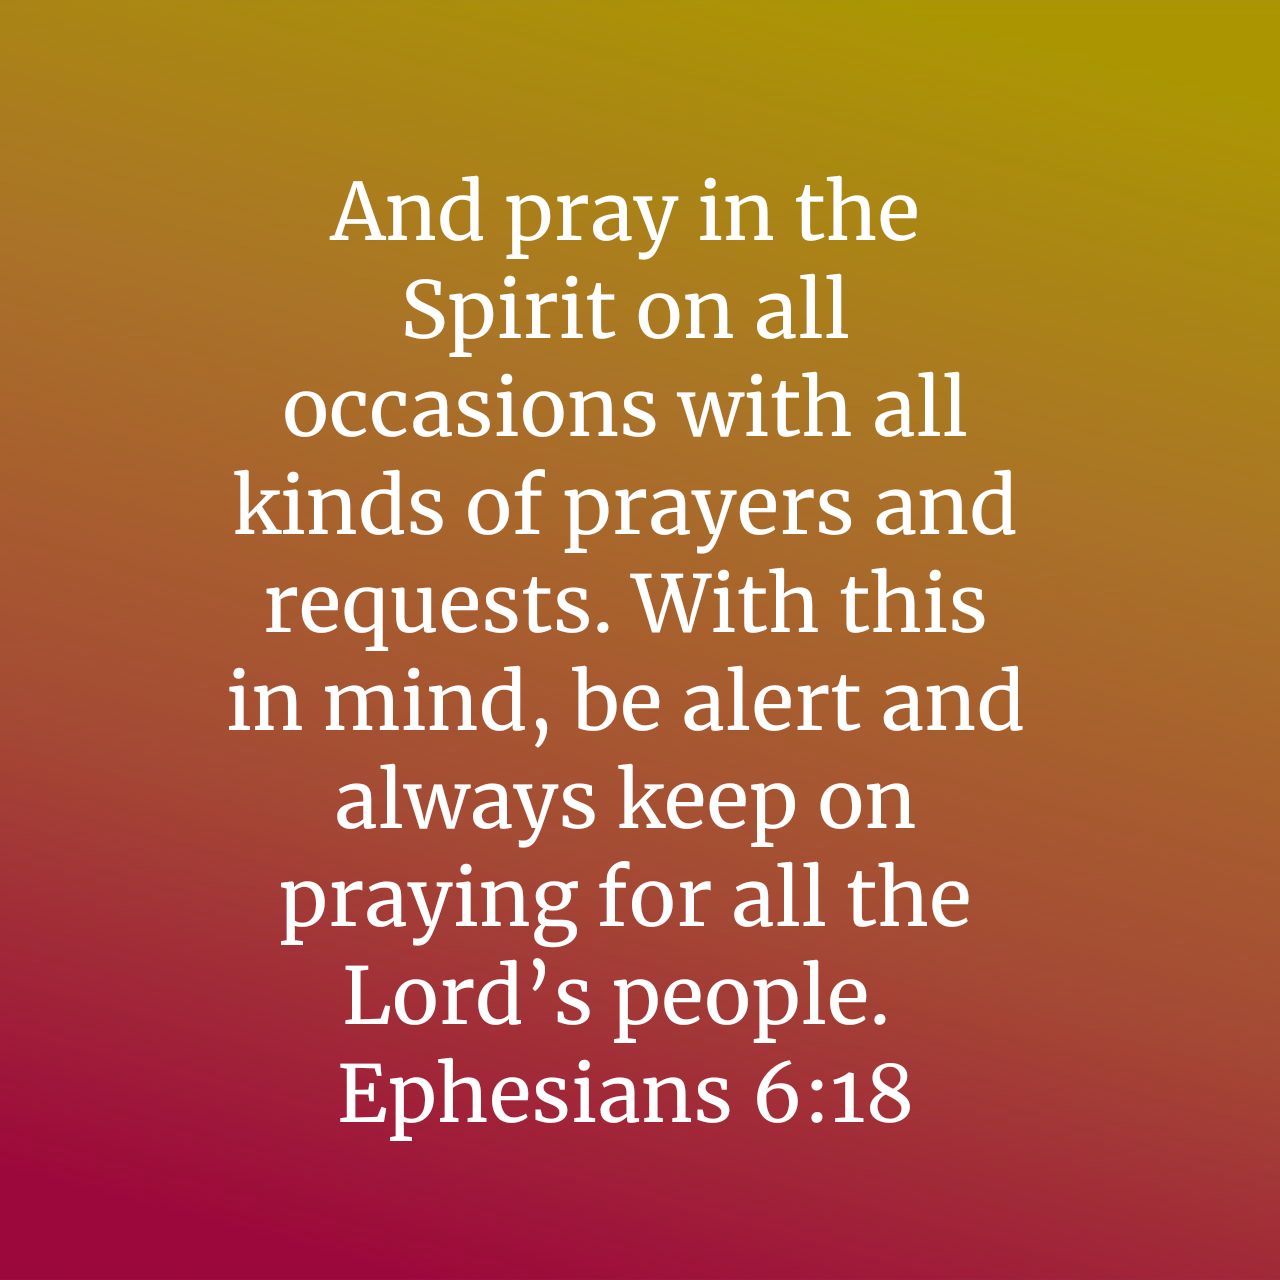 And pray in the Spirit on all occasions with all kinds of prayers and requests. With this in mind, be alert and always keep on praying for all the Lord' s people Ephesians 6.18